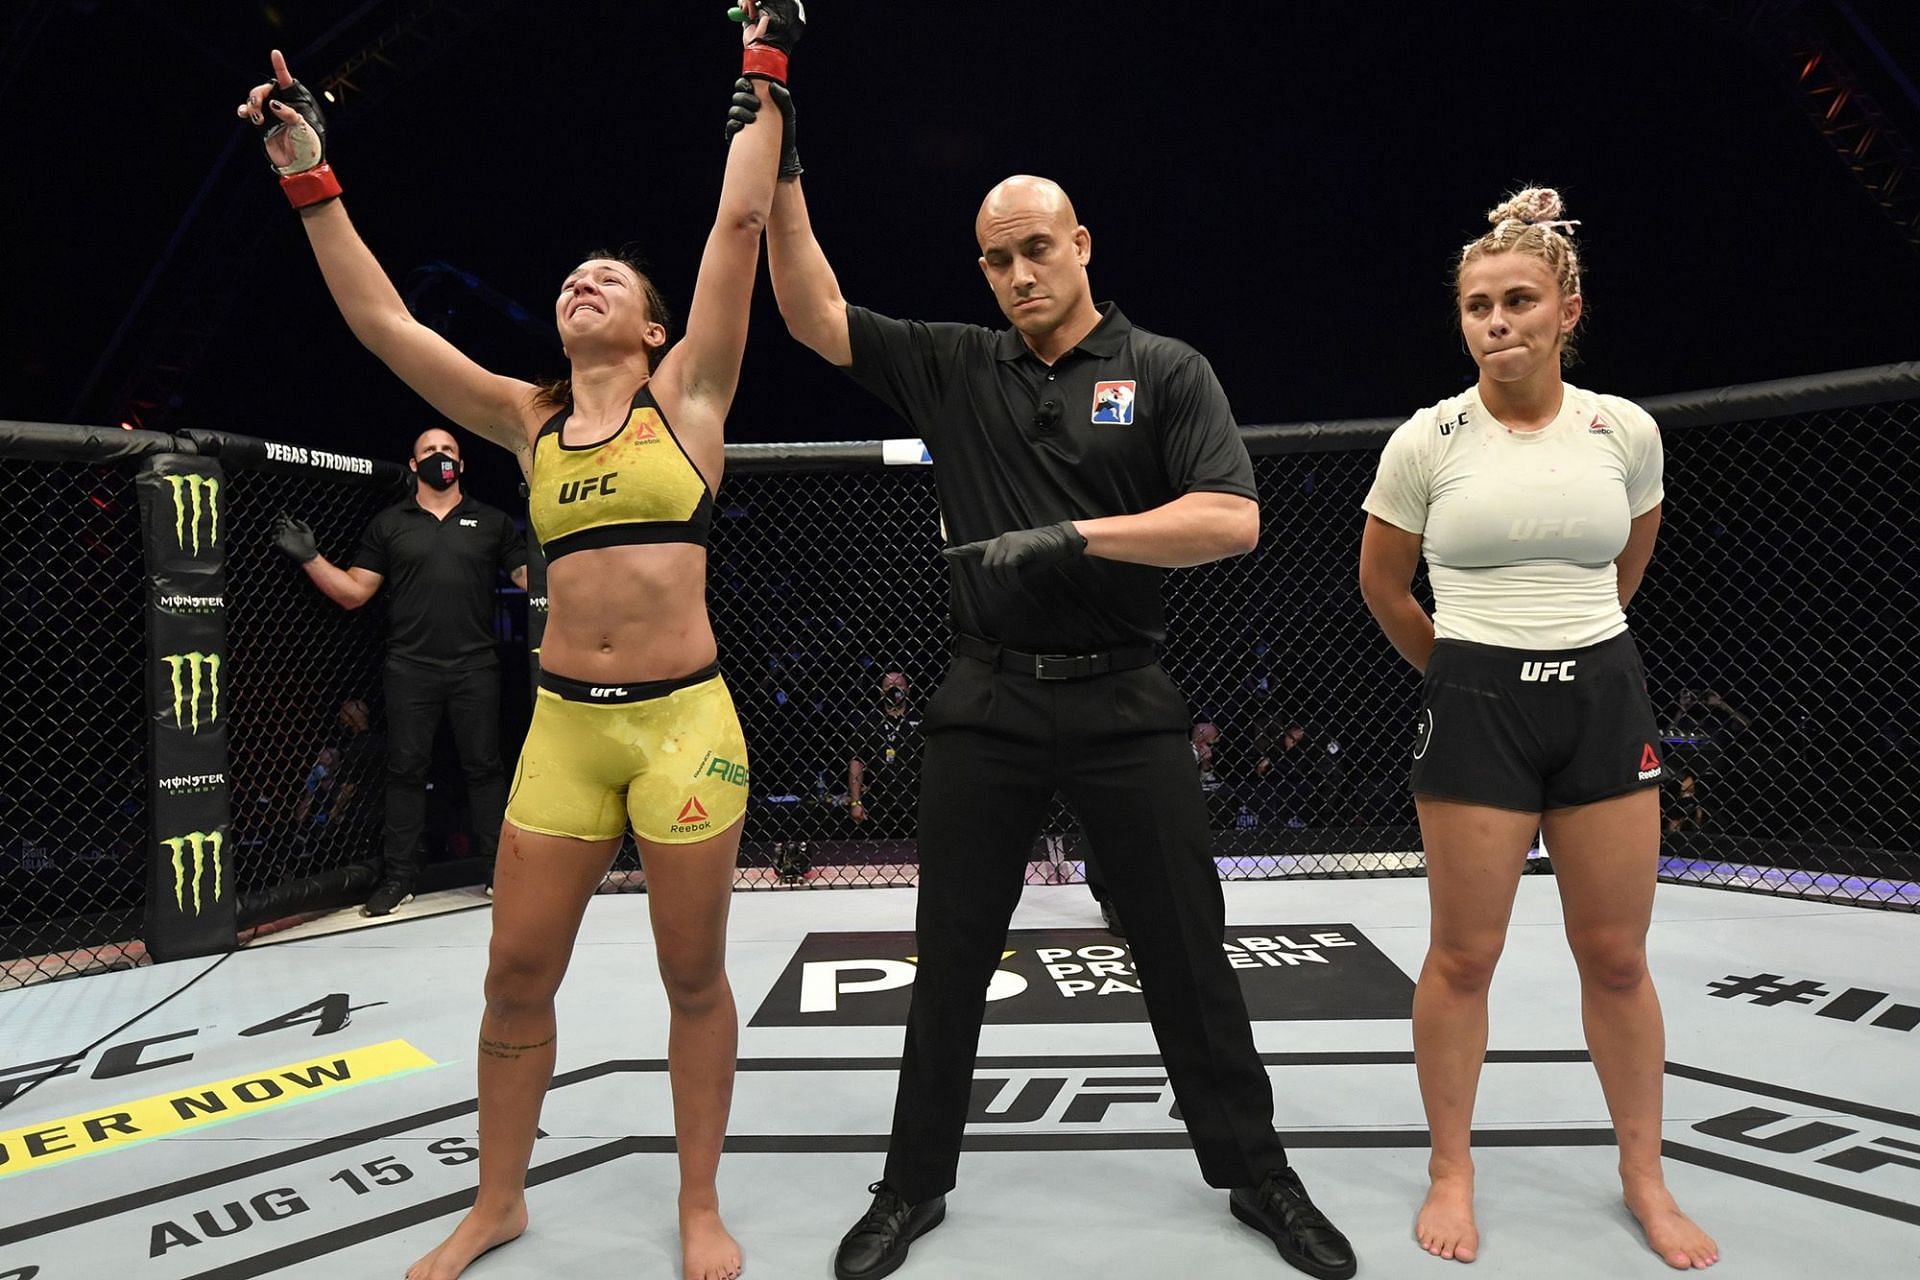 Paige VanZant was given a tricky fight with Amanda Ribas before departing the UFC in 2020